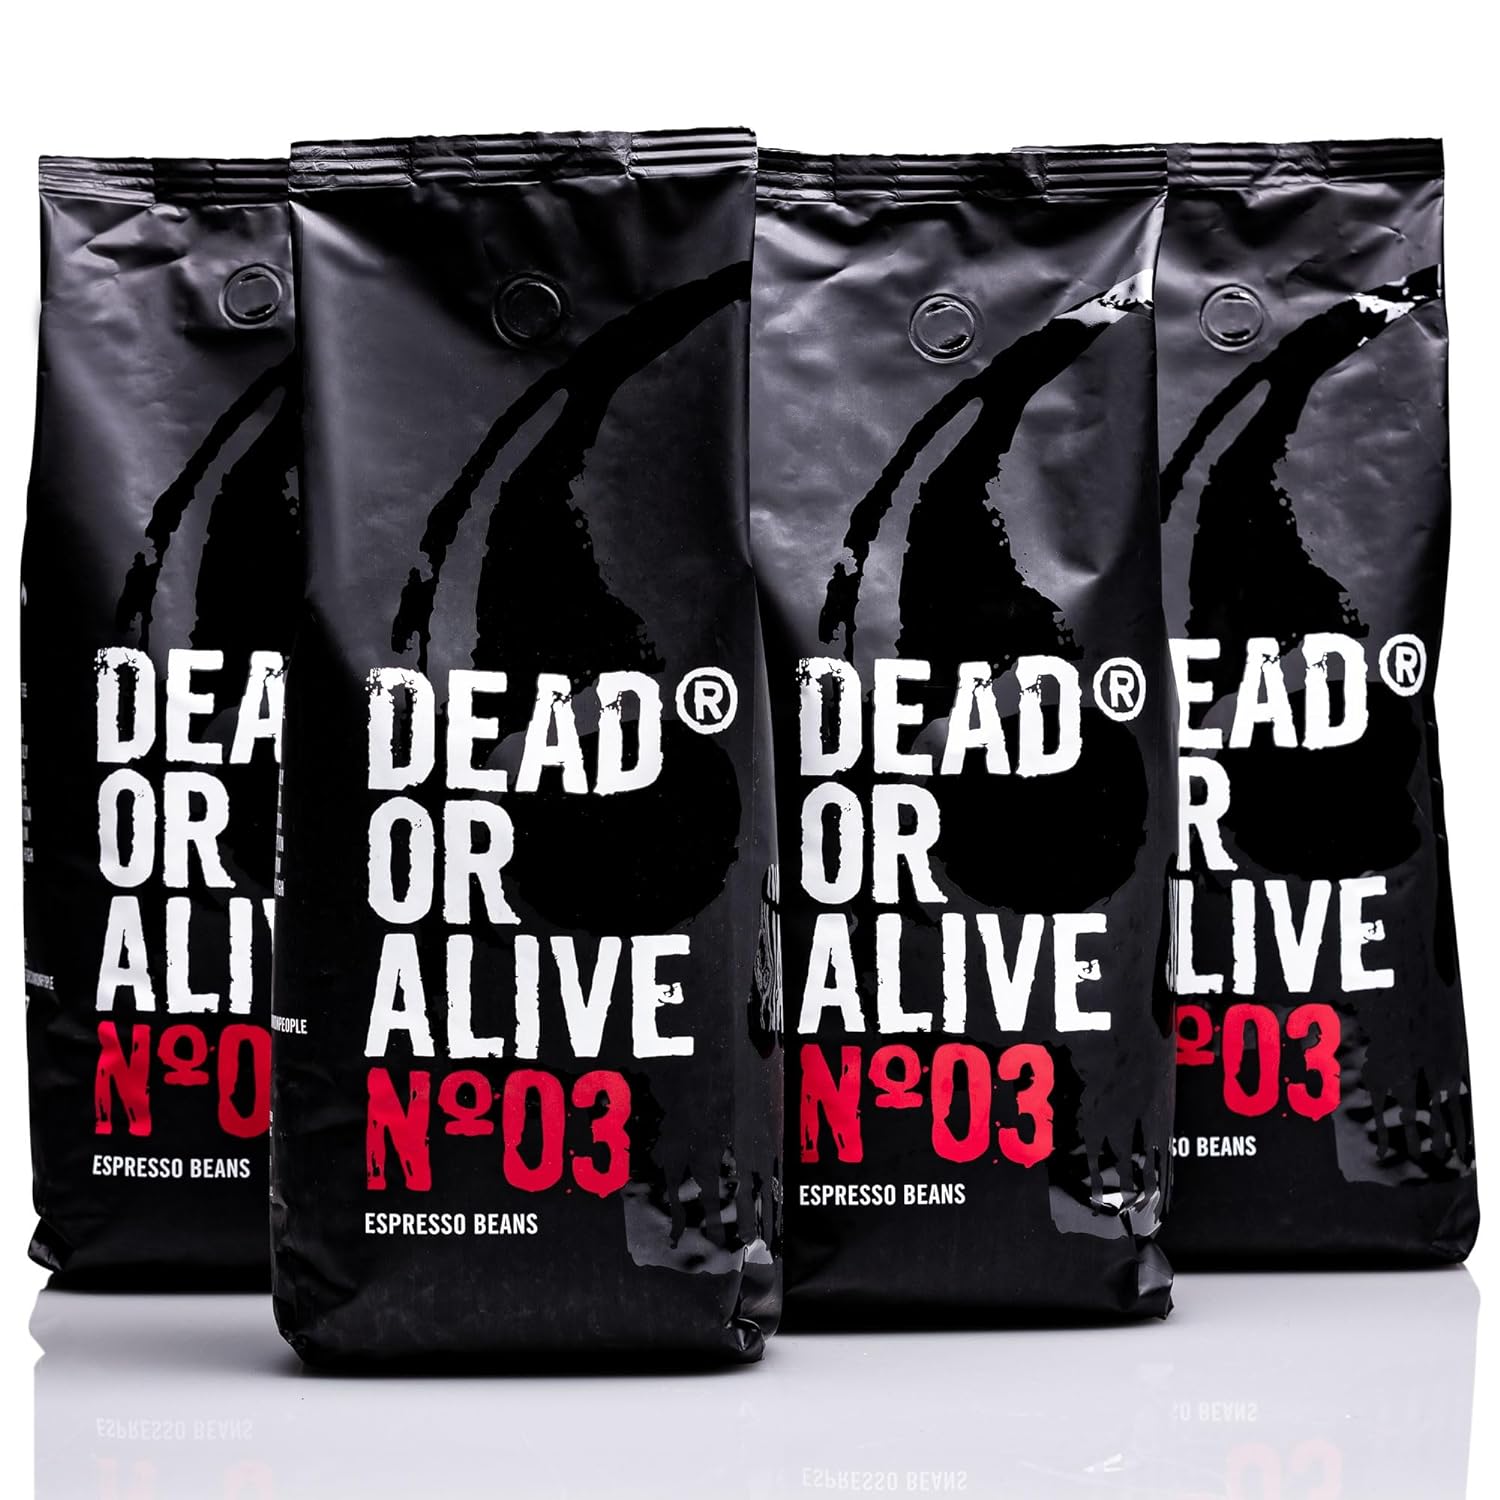 Dead or Alive Espresso No3 - Strong espresso beans 4x1kg - 100% robusta - coffee beans for fully automatic coffee machine and espresso machine - whole beans with lots of caffeine from Italy - Coffee Beans (4er Pack)